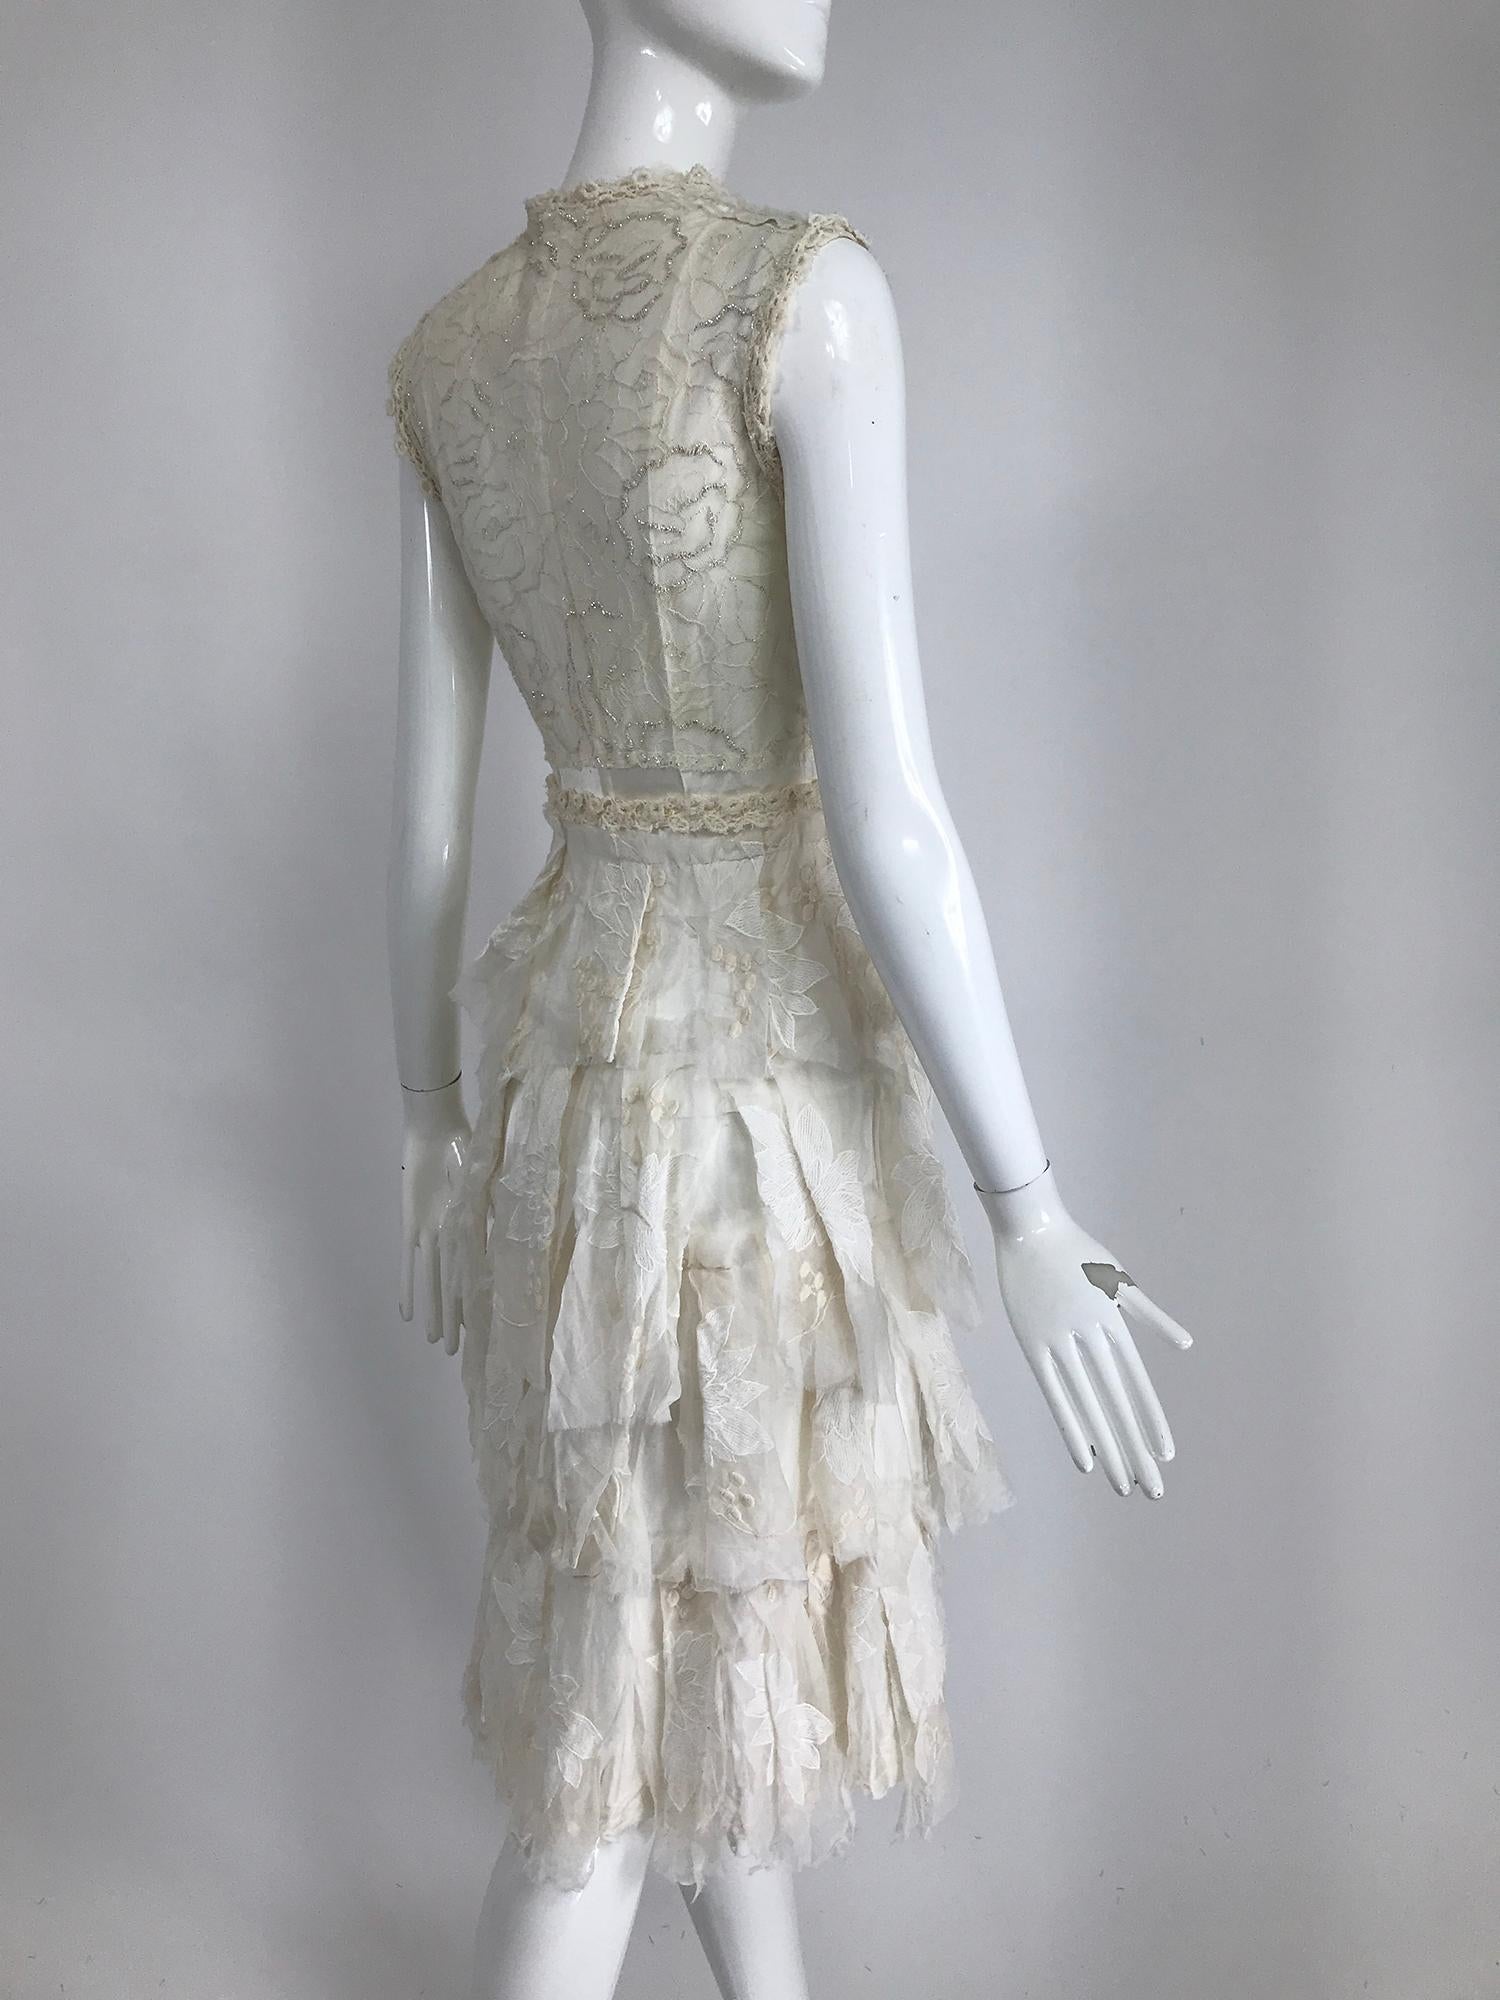 Women's Gregory Parkinson Pieced Applique White Silk and Lace Dress